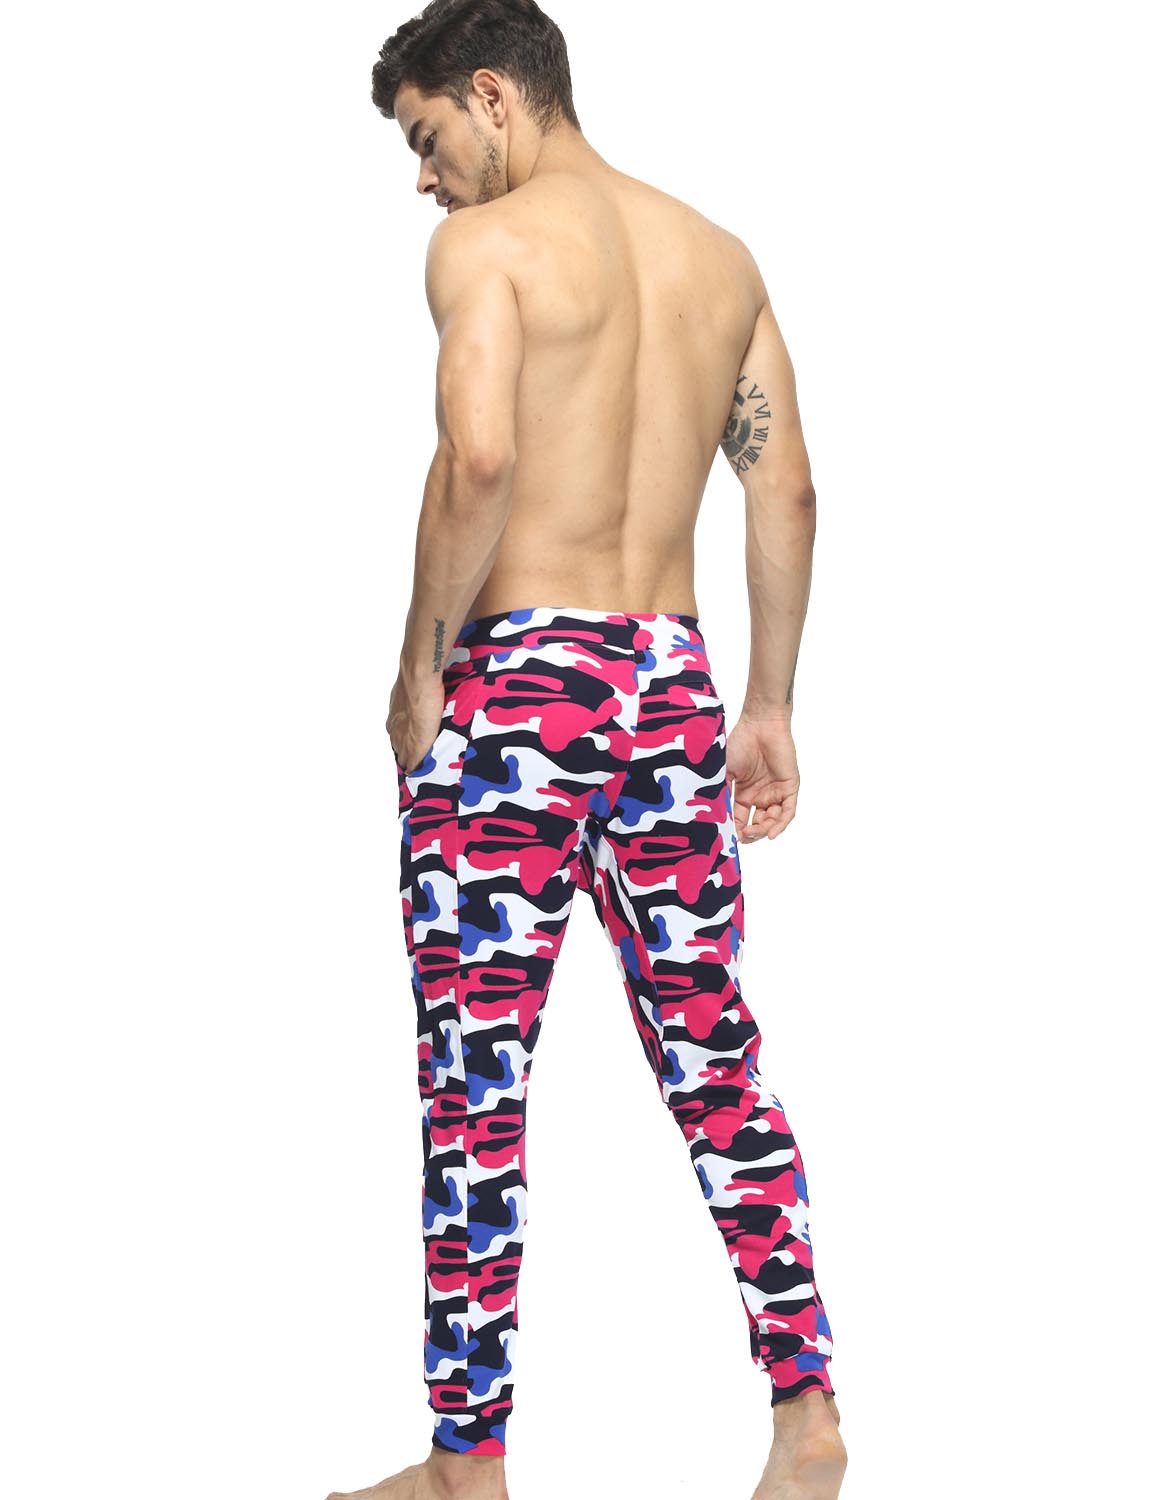 Camouflage Jogging Trousers Pants 60506